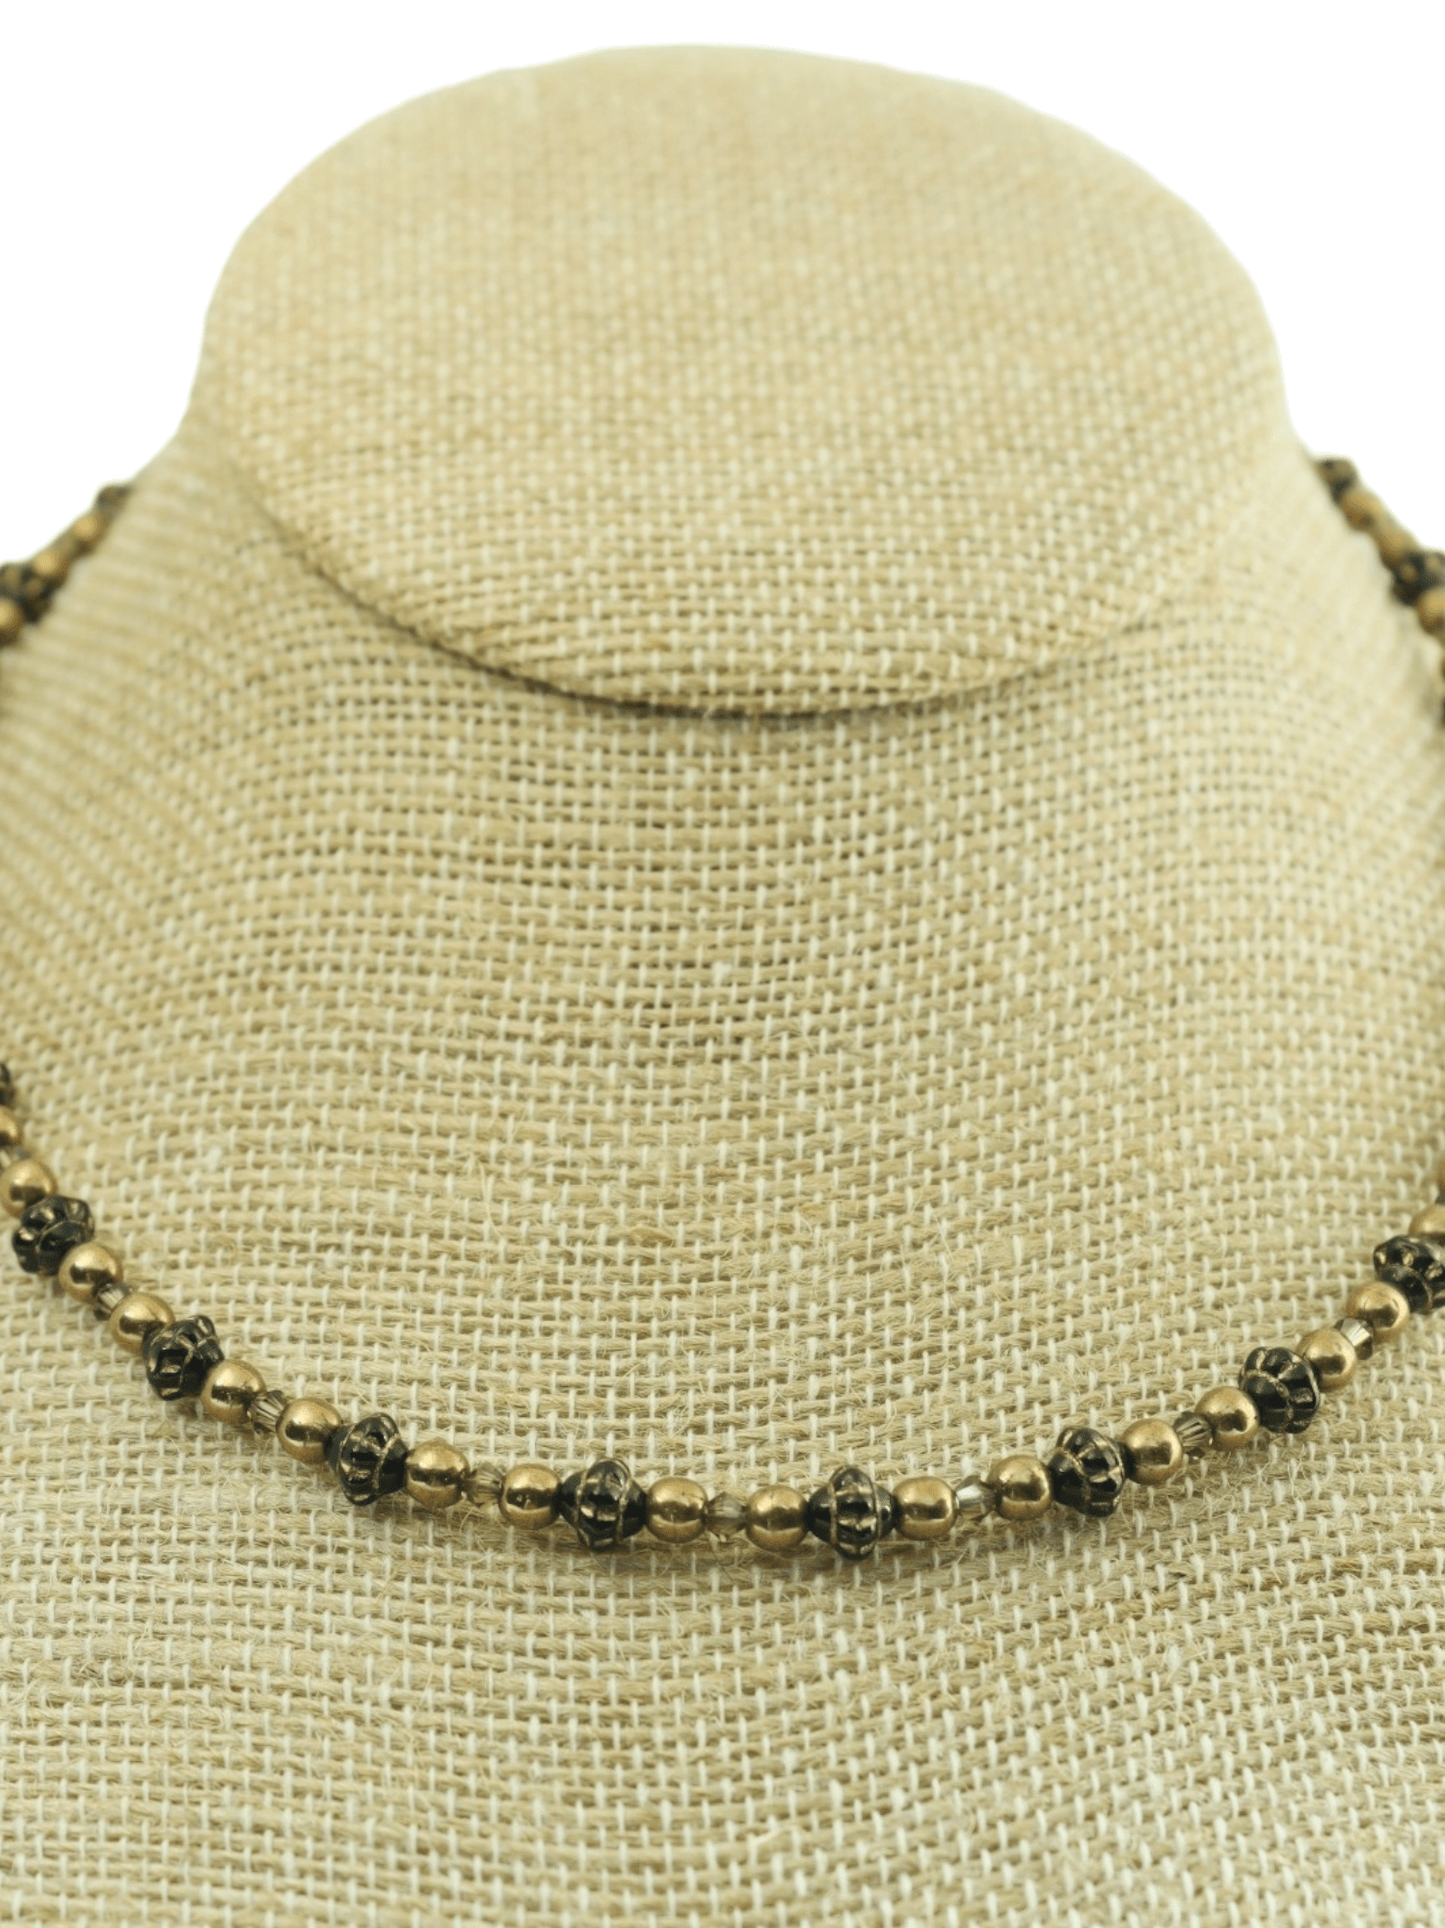 Everyday Delicate Bronze Glass Bead And Crystal Beaded Necklace - Kaleidoscopes And Polka Dots